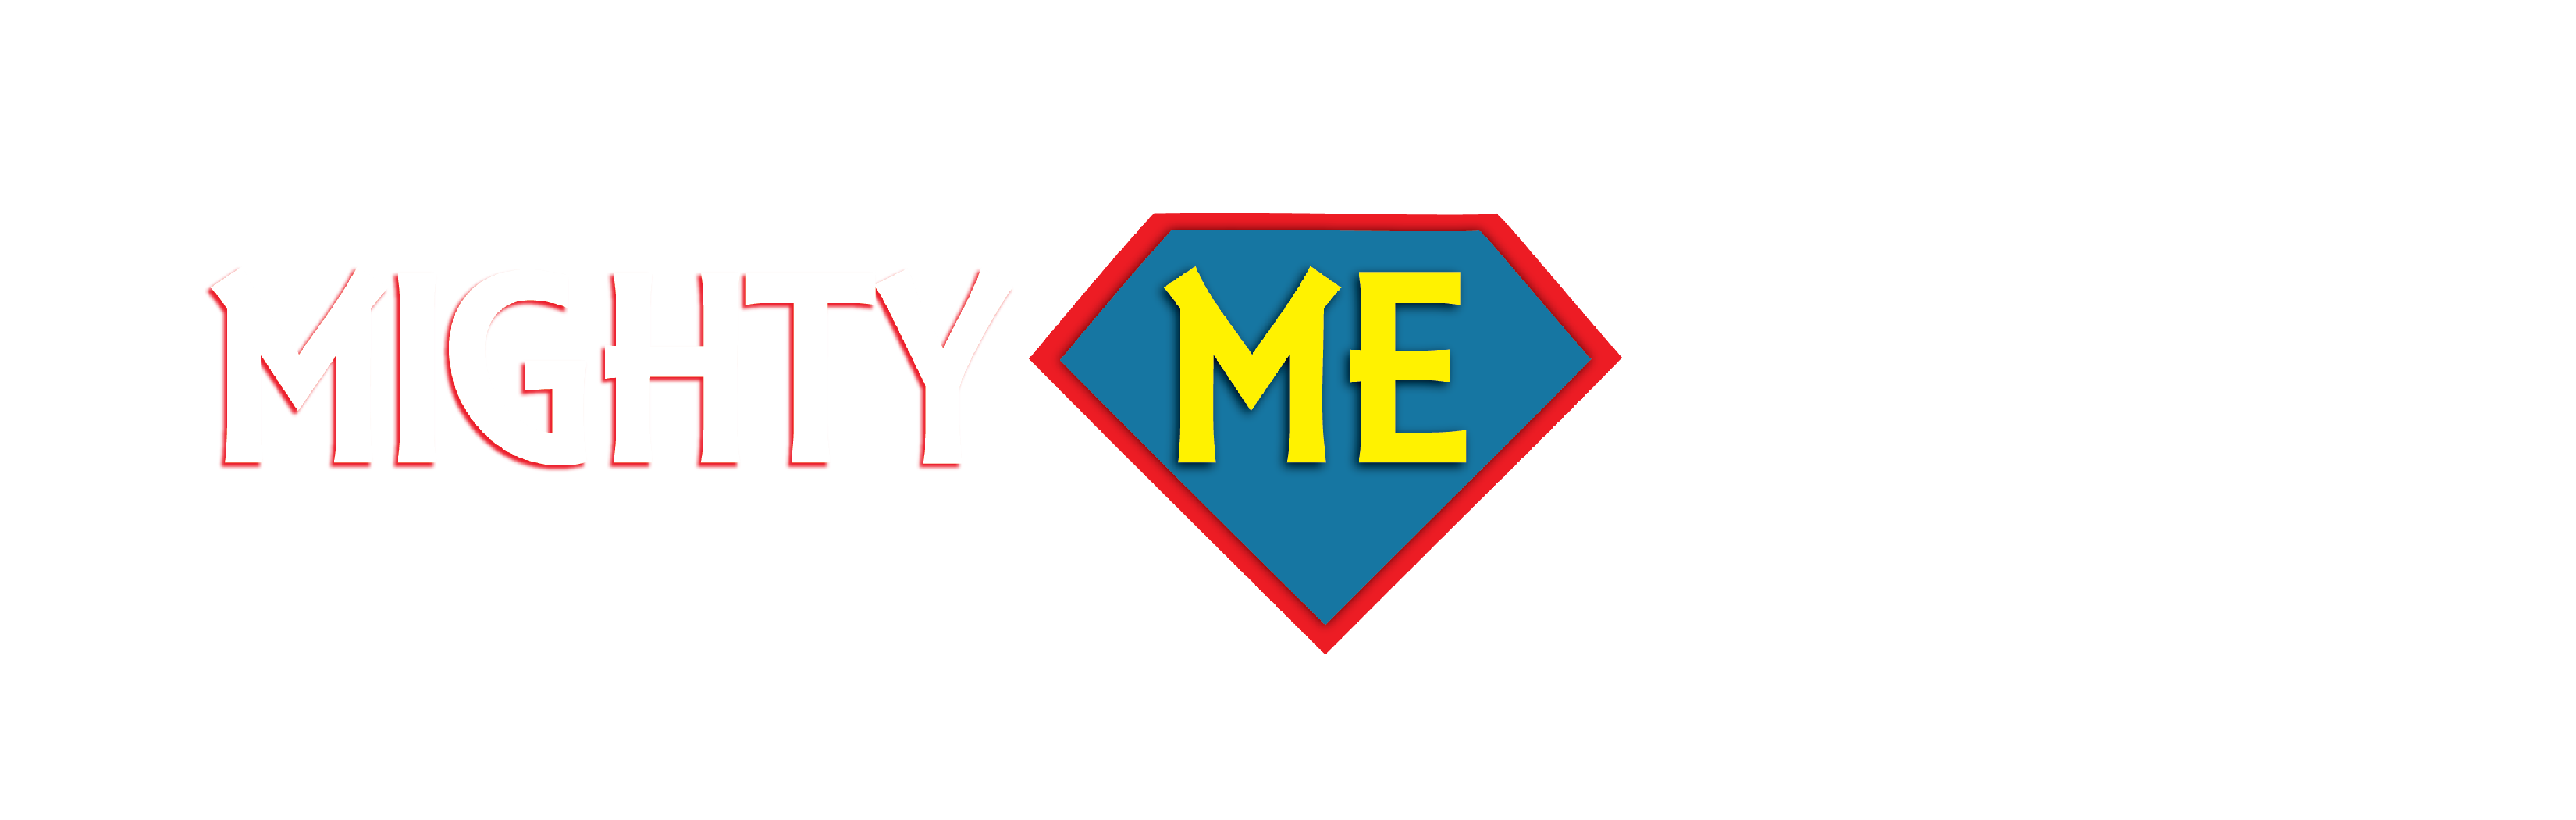 Mighty Me!